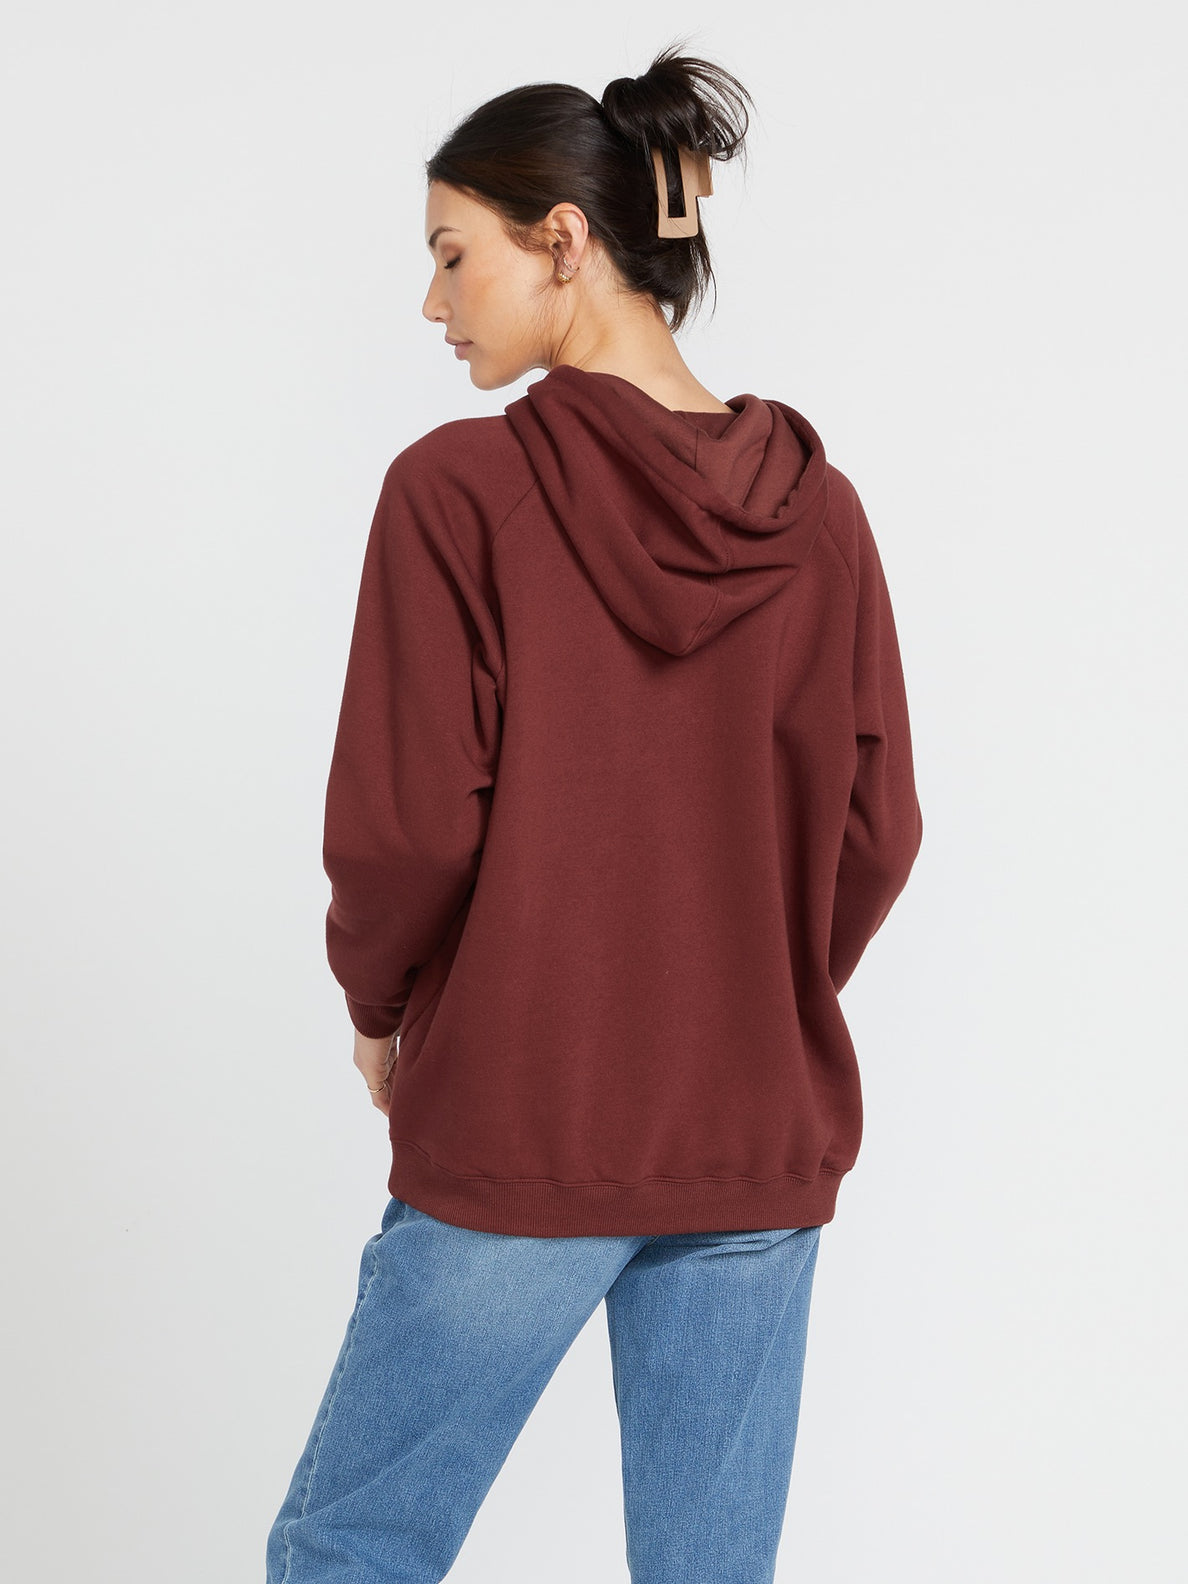 Truly Stoked Boyfriend Pullover - Cayenne